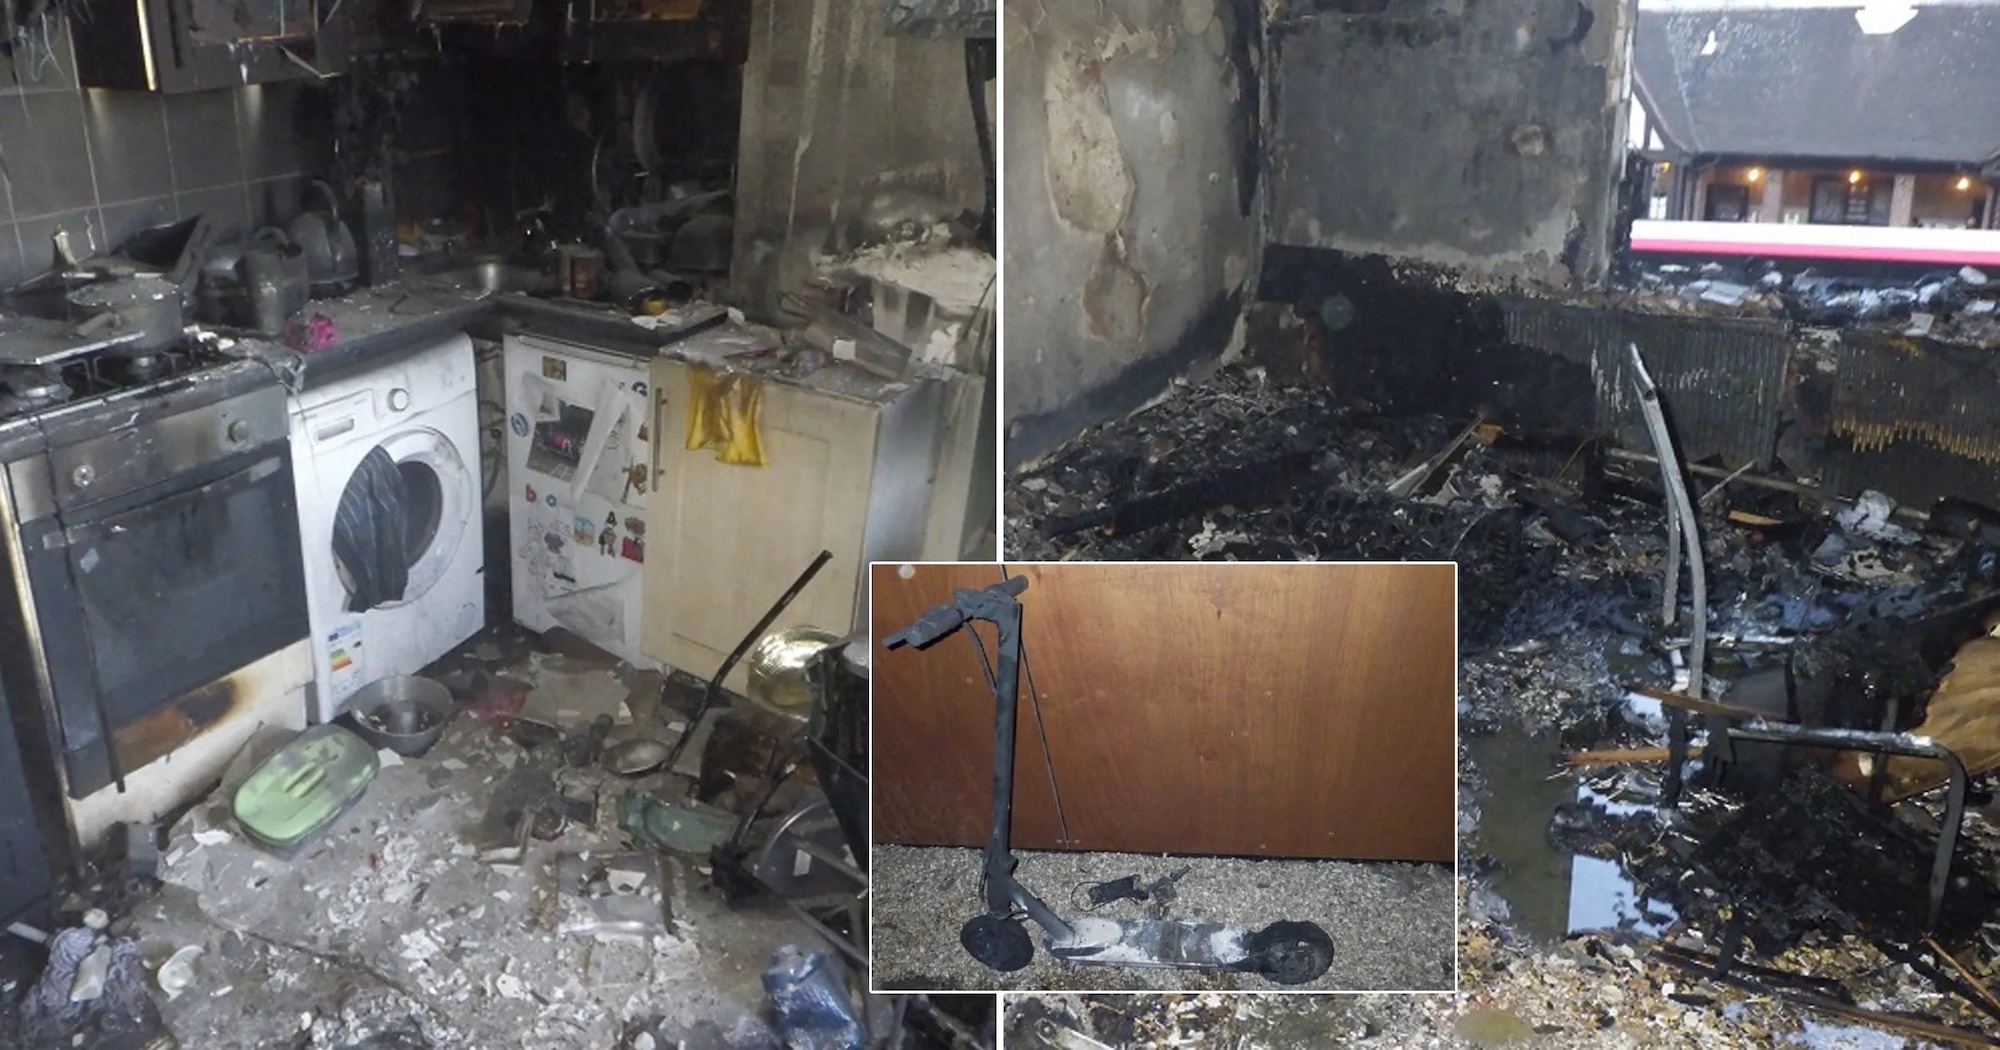 The aftermath of a lithium battery fire. Media sourced from Metro UK.